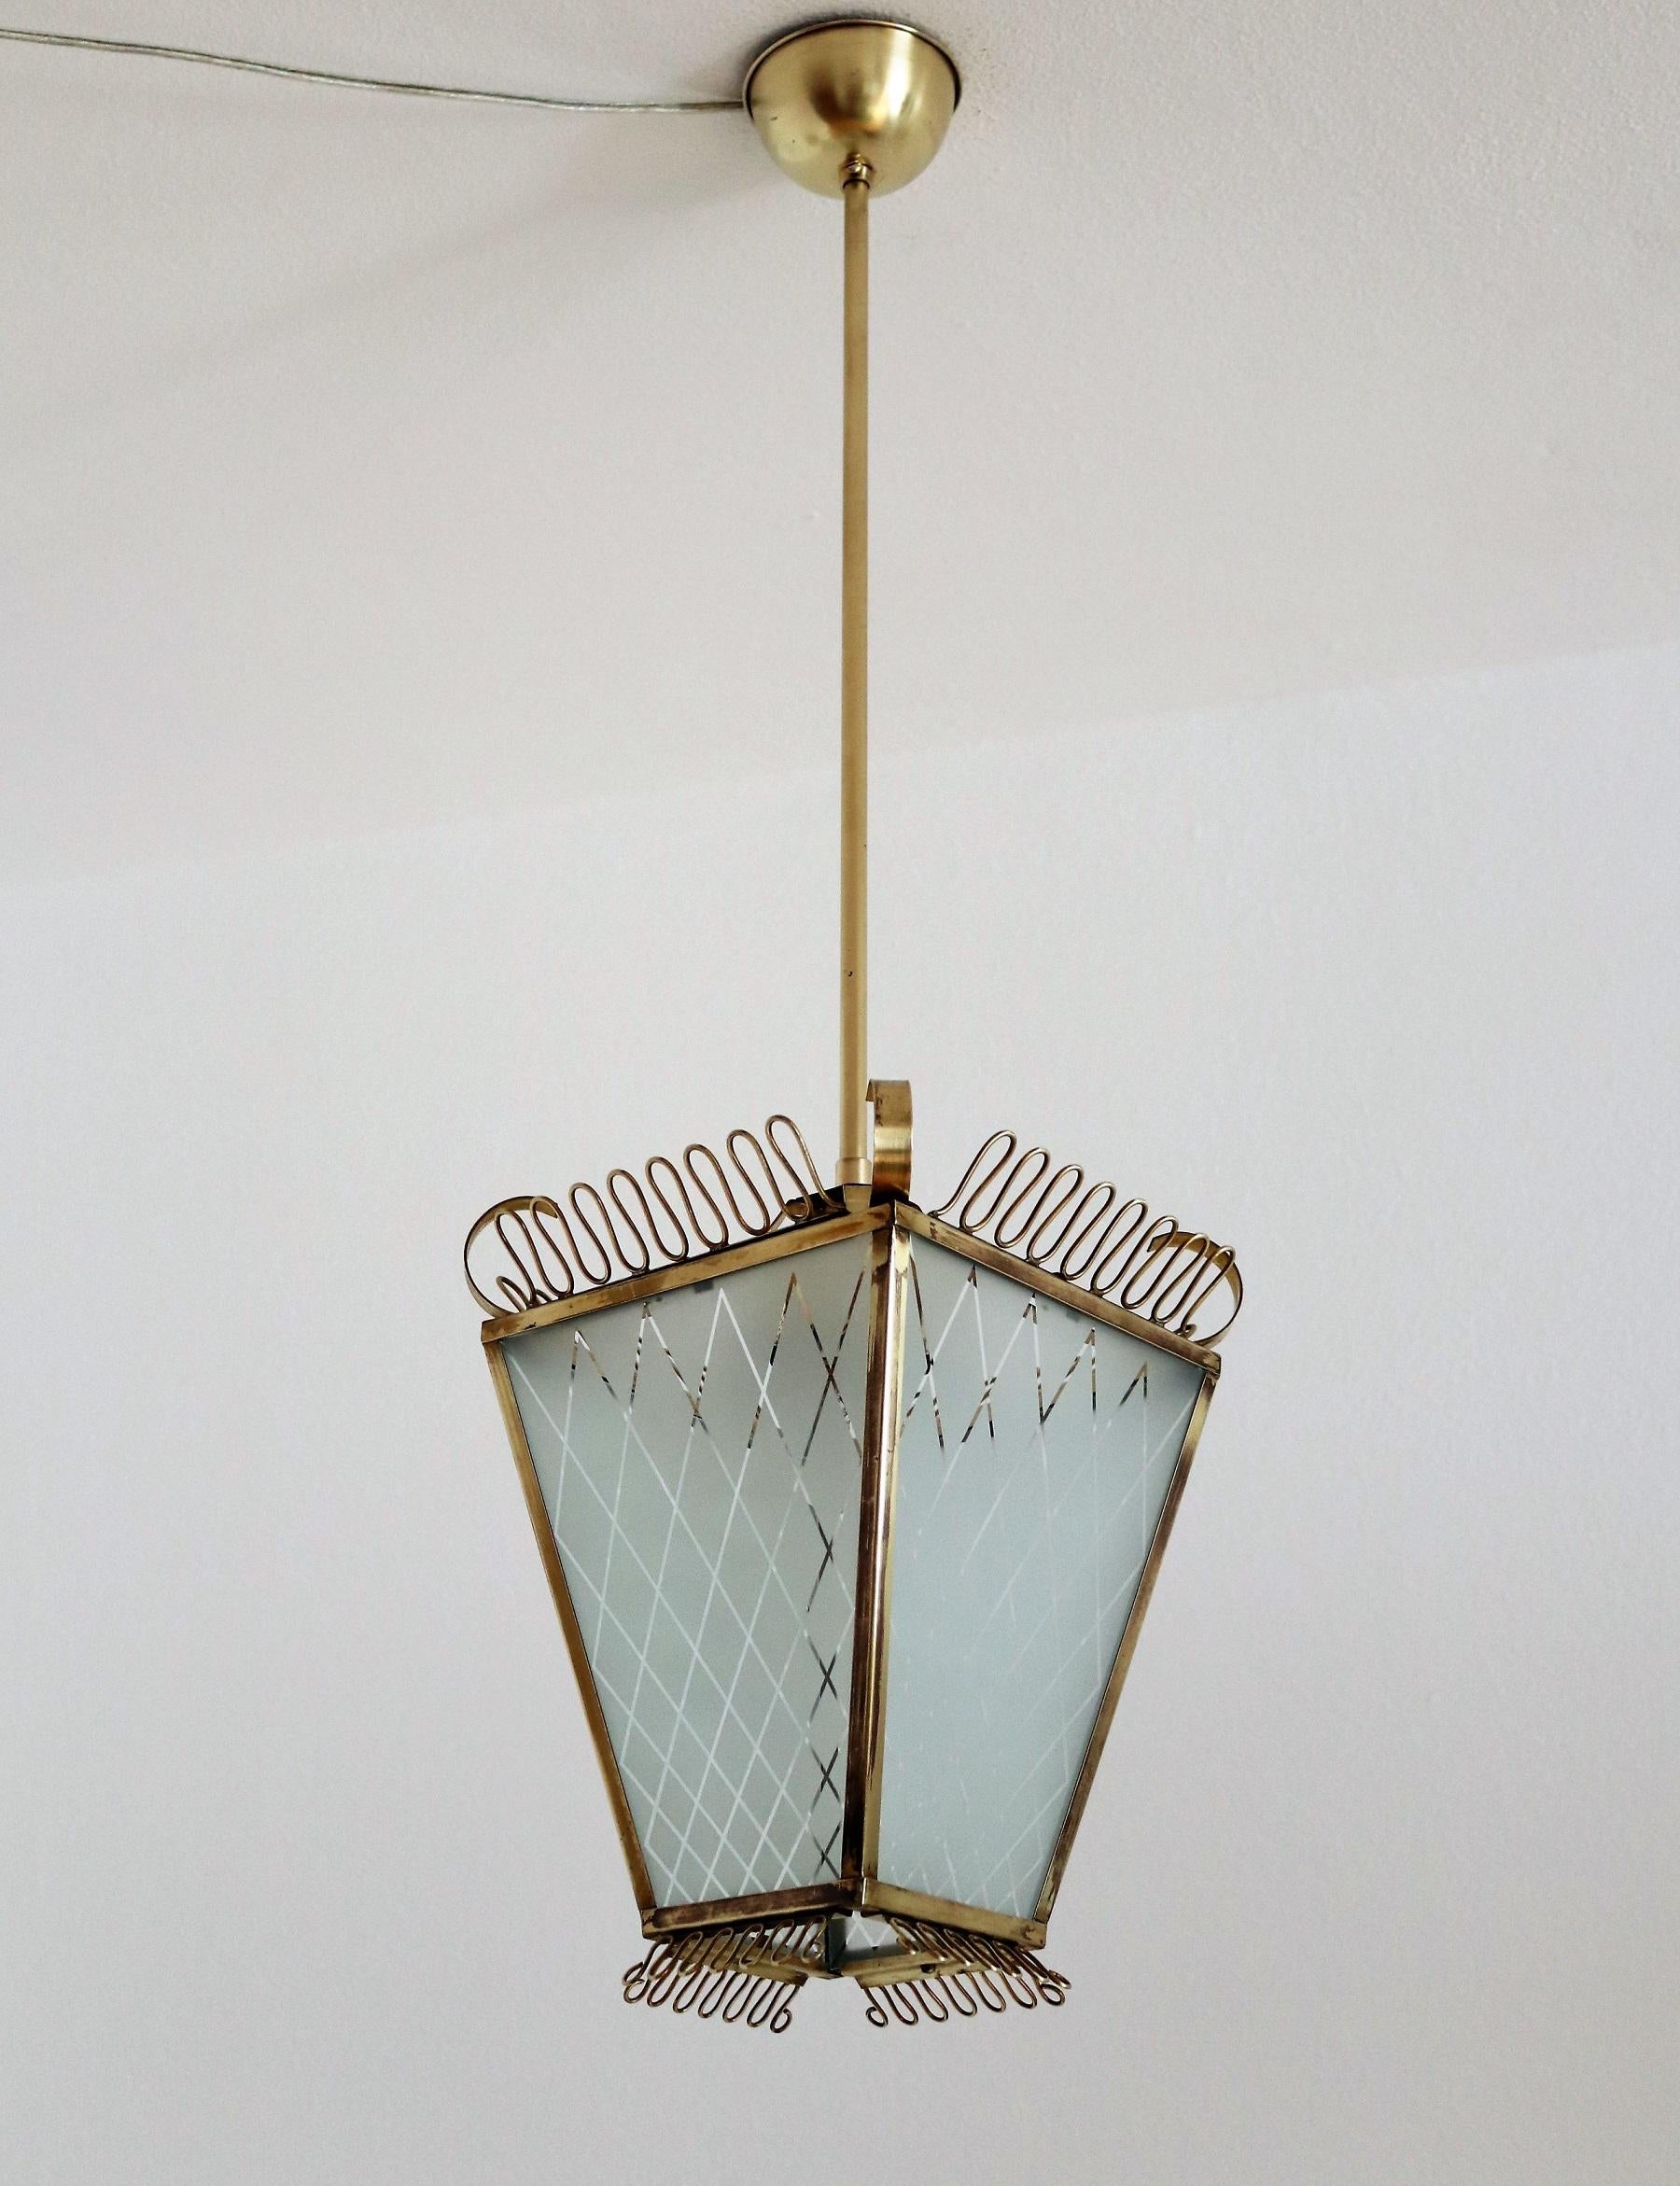 Beautiful tiny pendant lamp or lantern with handcrafted glass and brass details.
Made in Italy in the 1950s.
The lantern have been completely disassembled, checked and cleaned and is in very good vintage and working condition.
The wiring and the